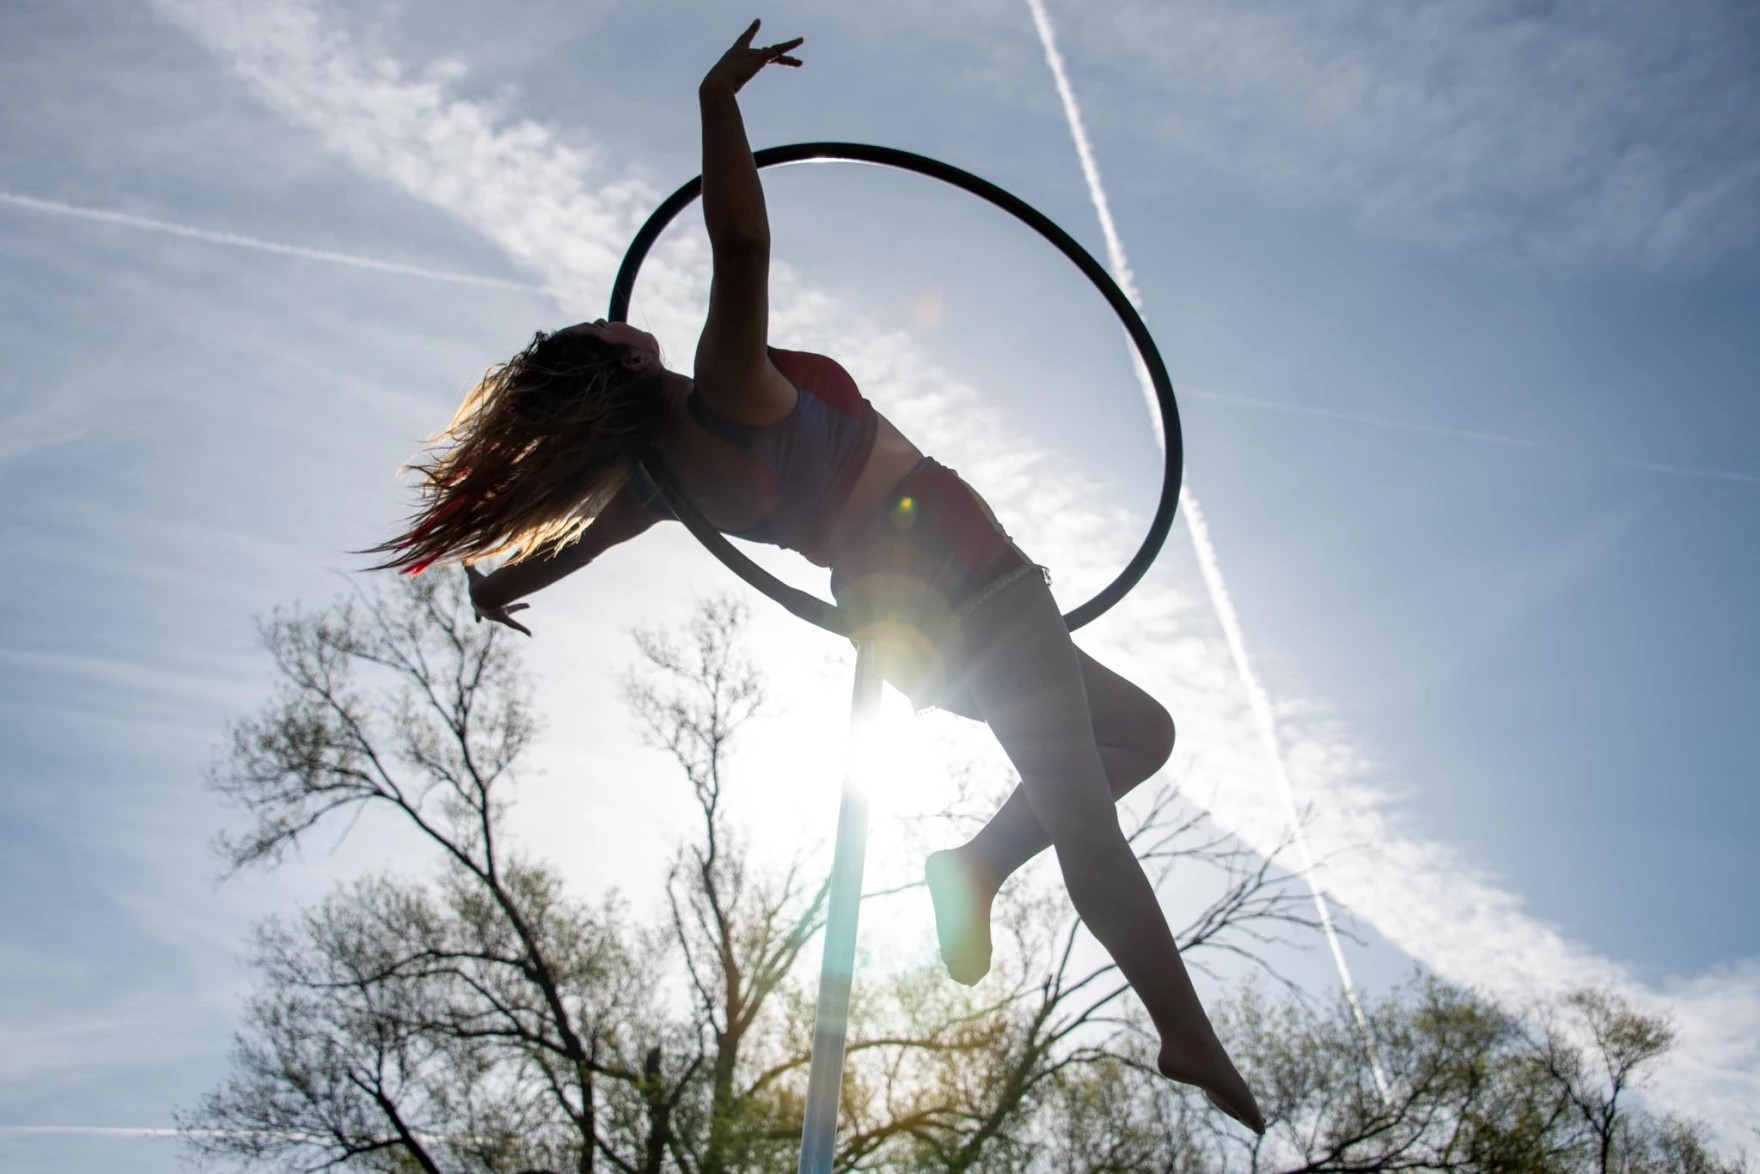 Maylissa Quinn warms up on a device she calls a "lollipop" — a metal ring on a pole that spins as she twirls in mid-air.